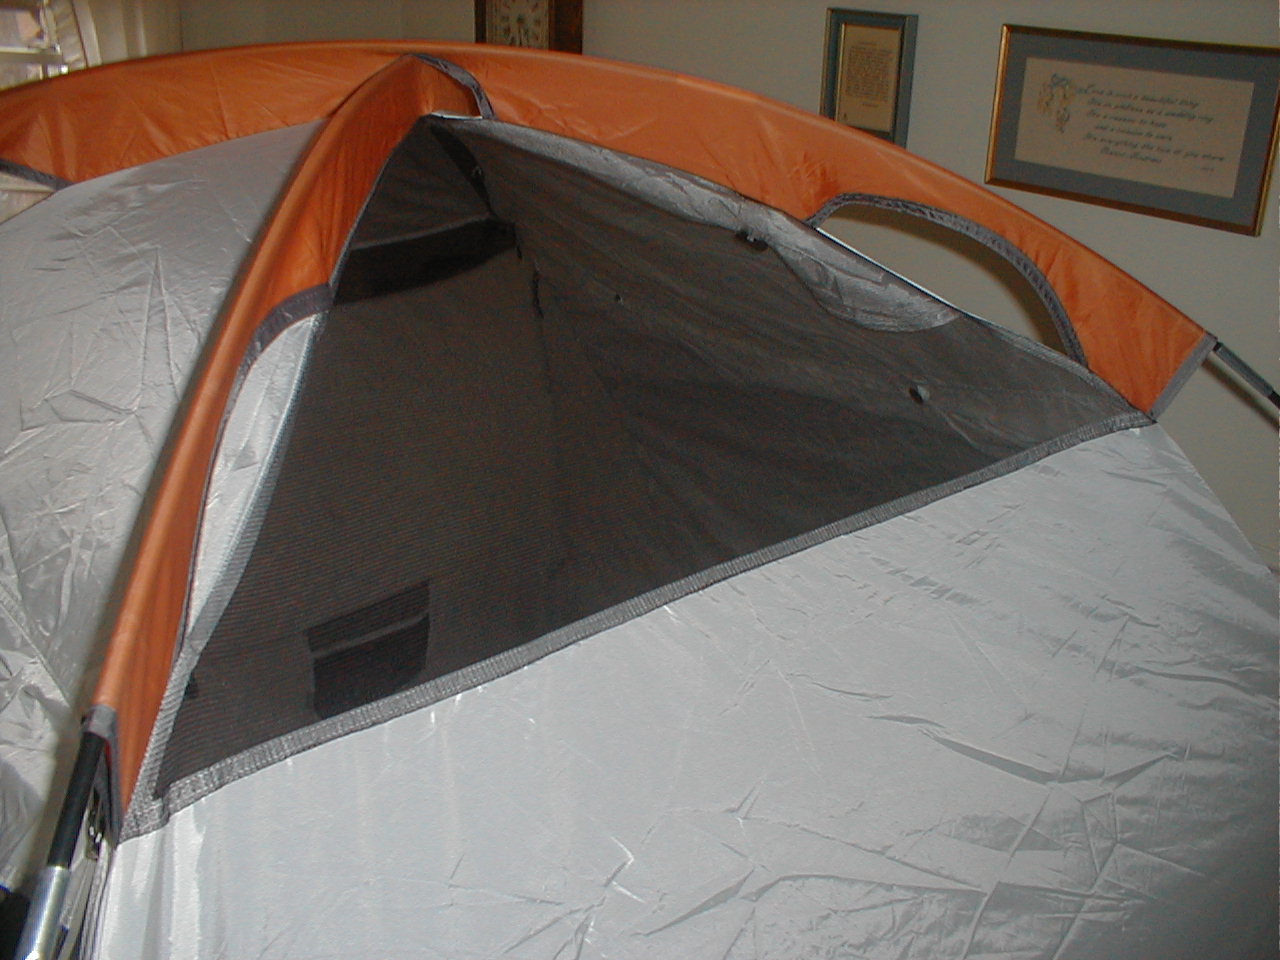 Seal your tent's mesh panels